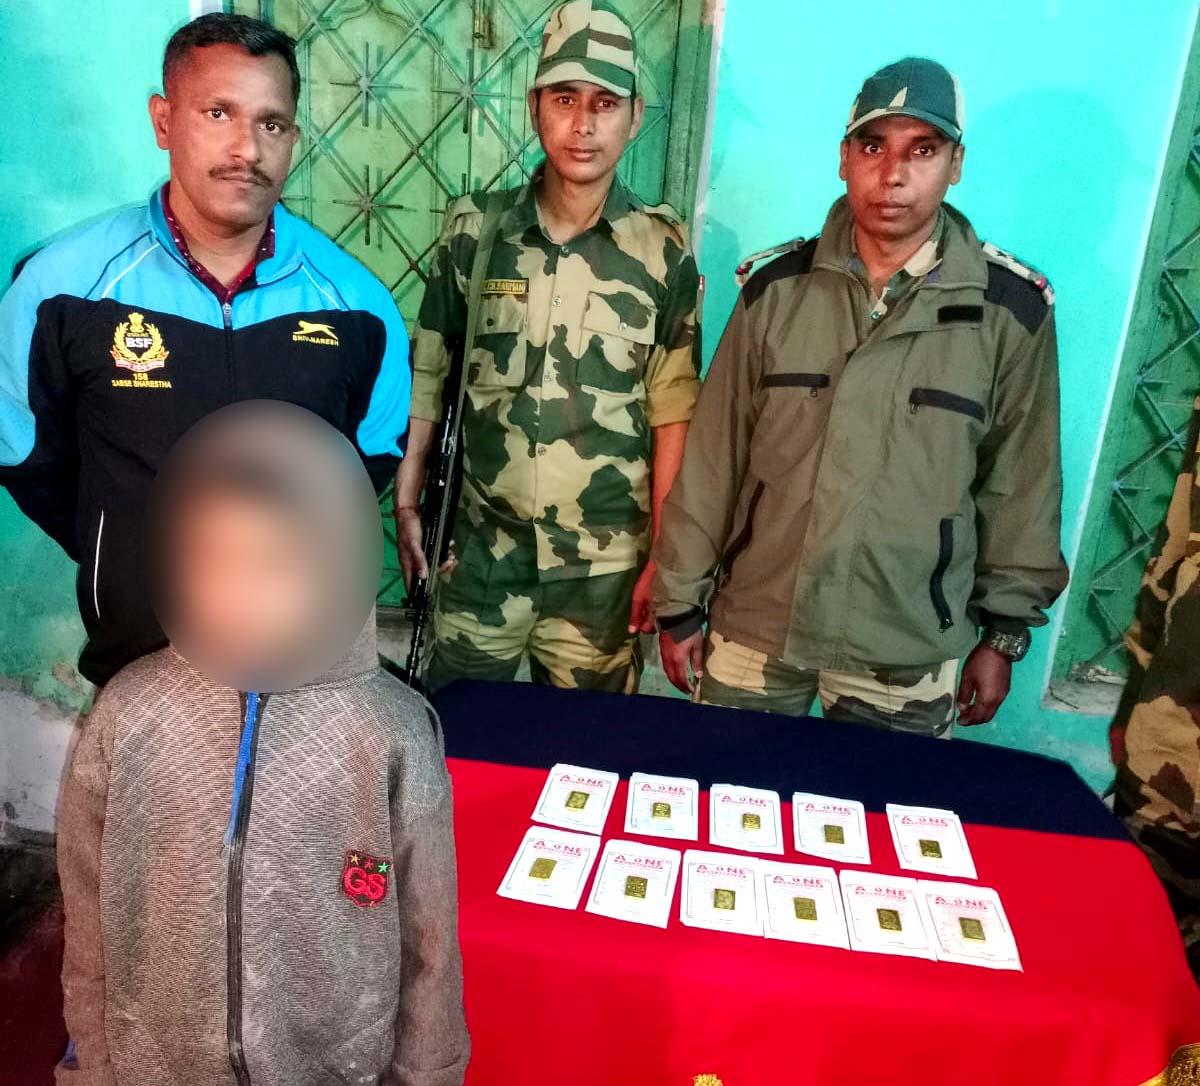 Boy-caught-in-Bagda-trying-to-smuggle-gold-biscuits